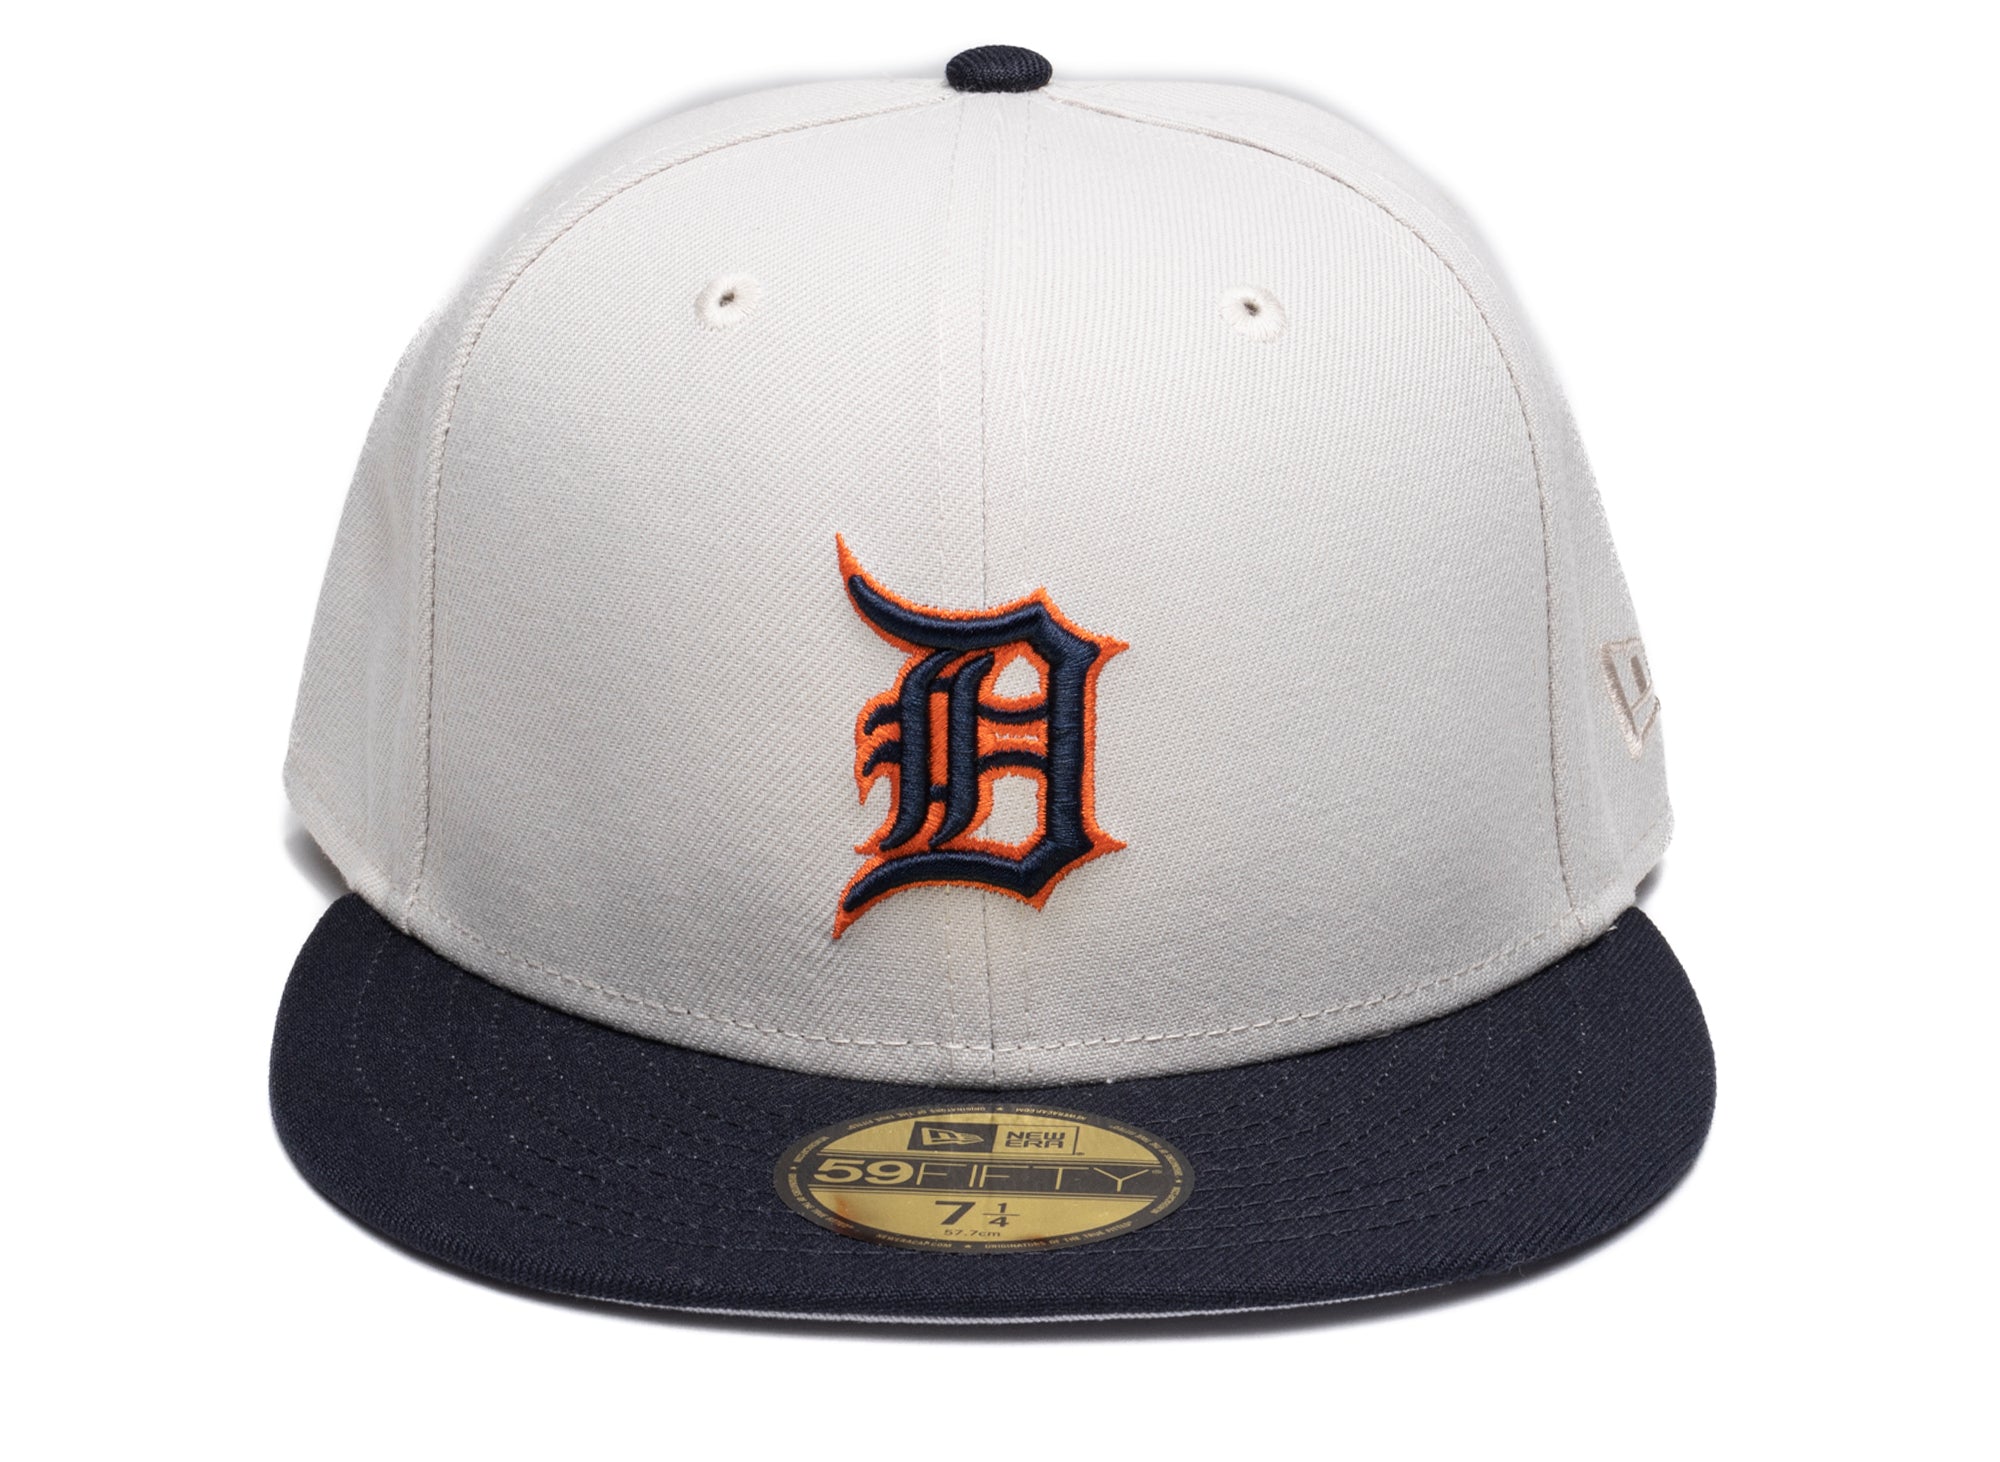 Detroit Tigers Fitted Hats & Snapbacks